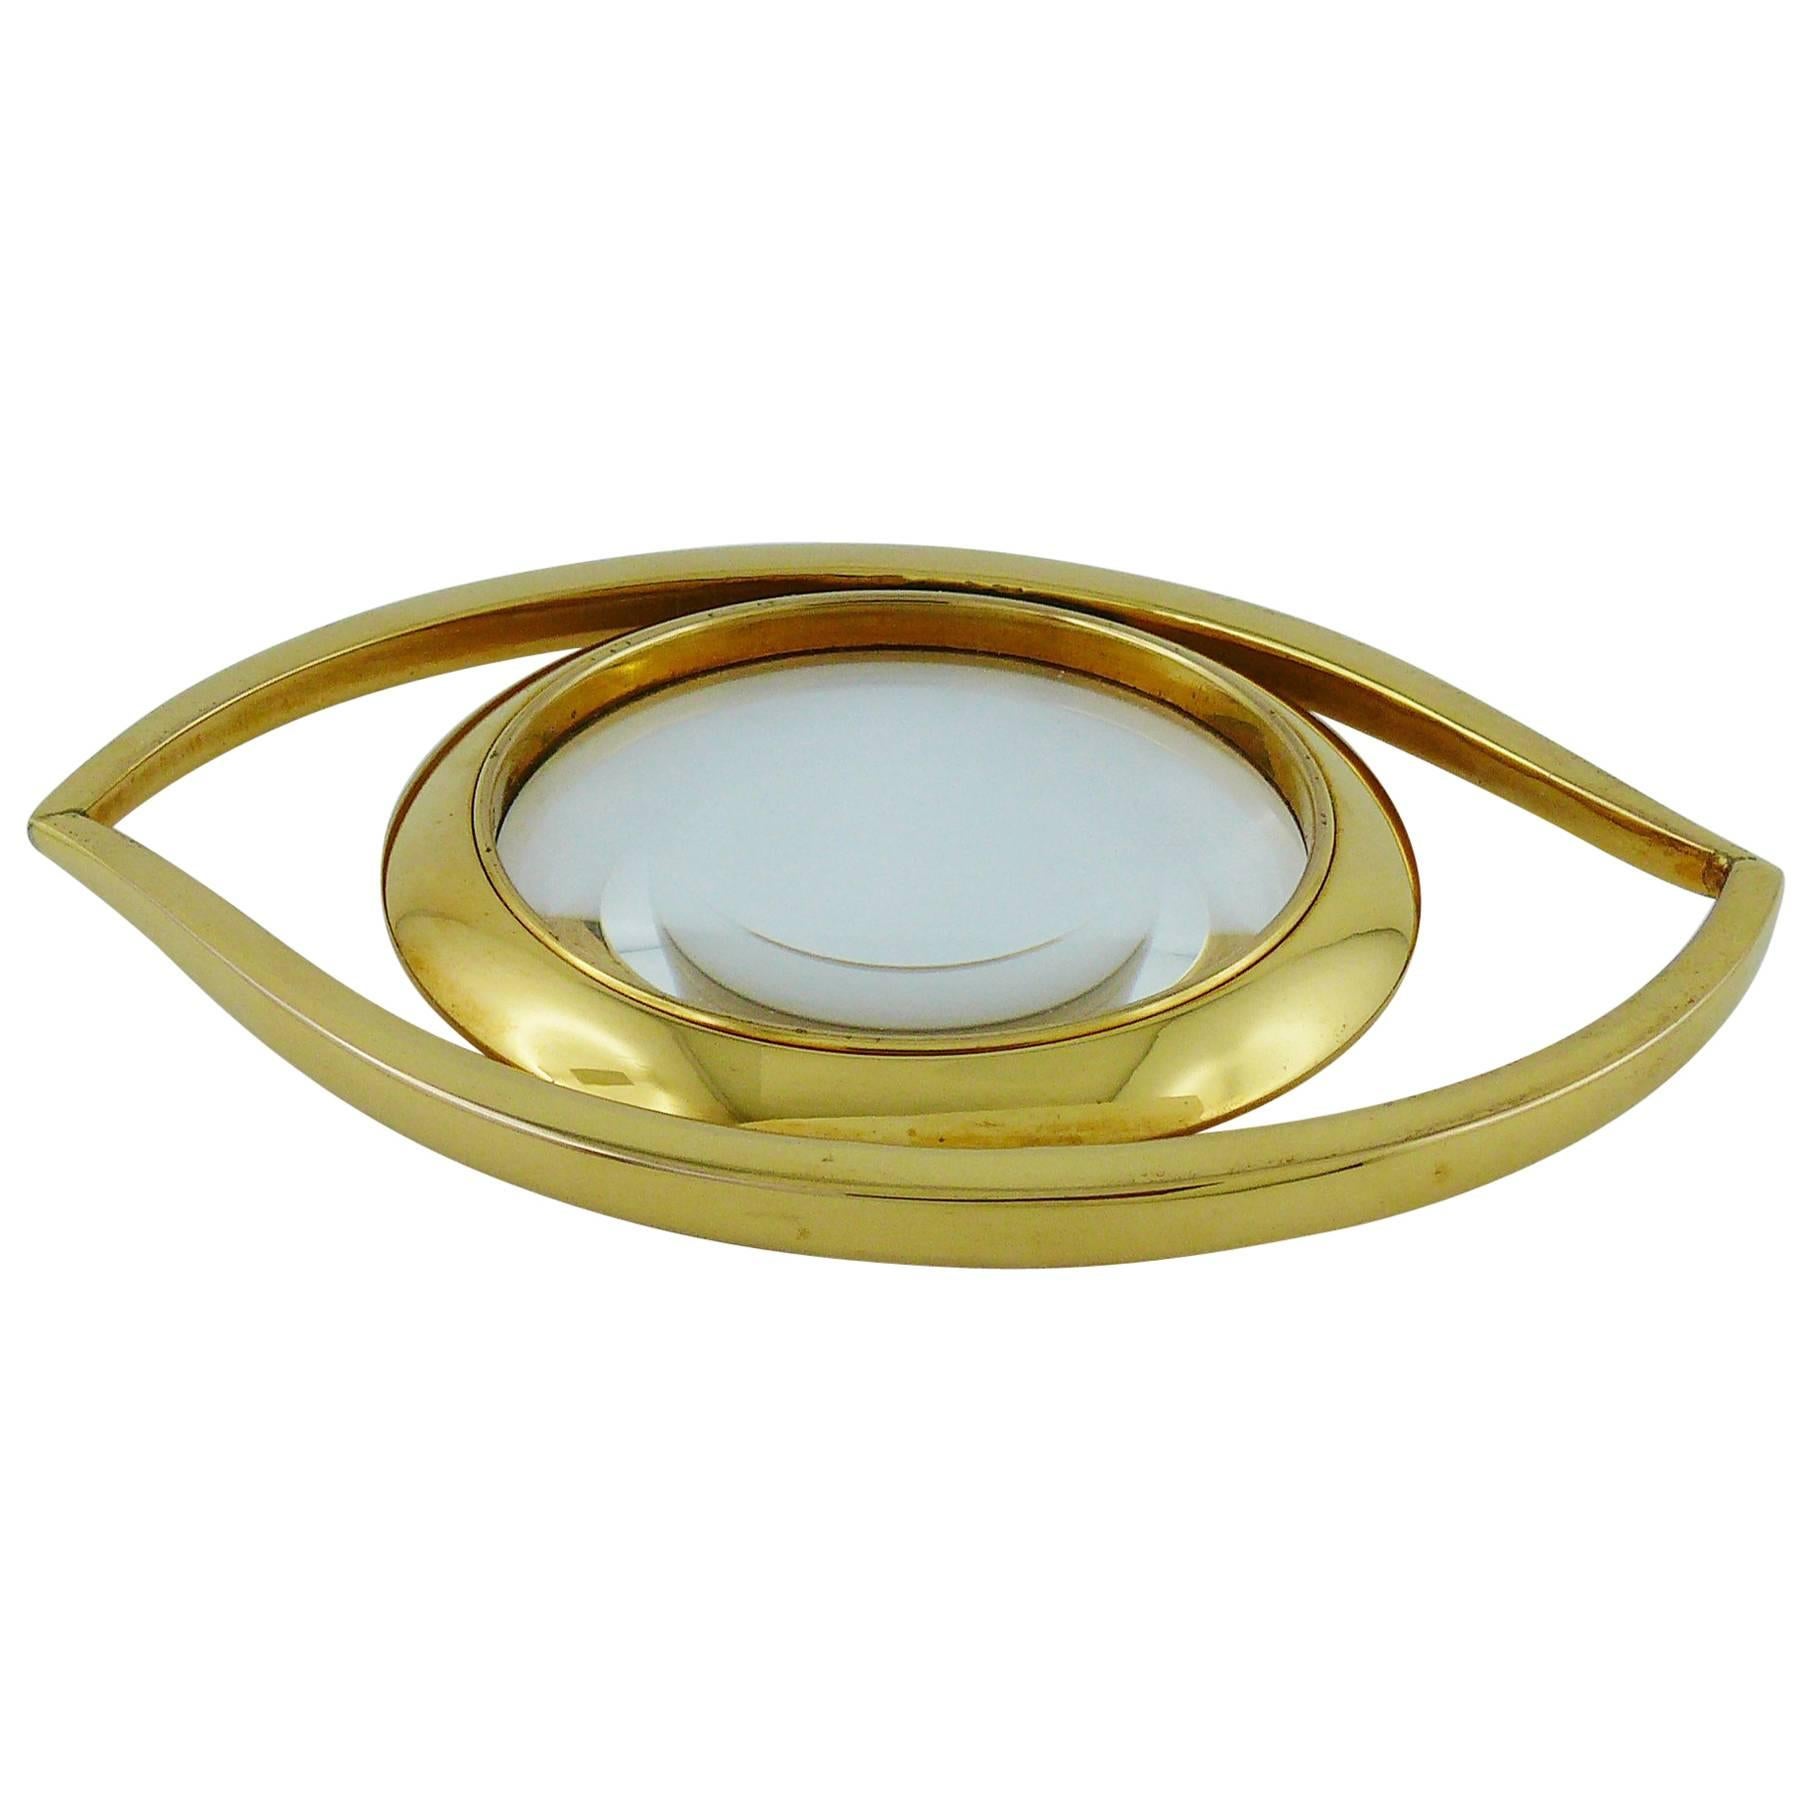 Hermès Vintage Cleopatra Eye Gold Toned Desk Magnifying Glass Paperweight